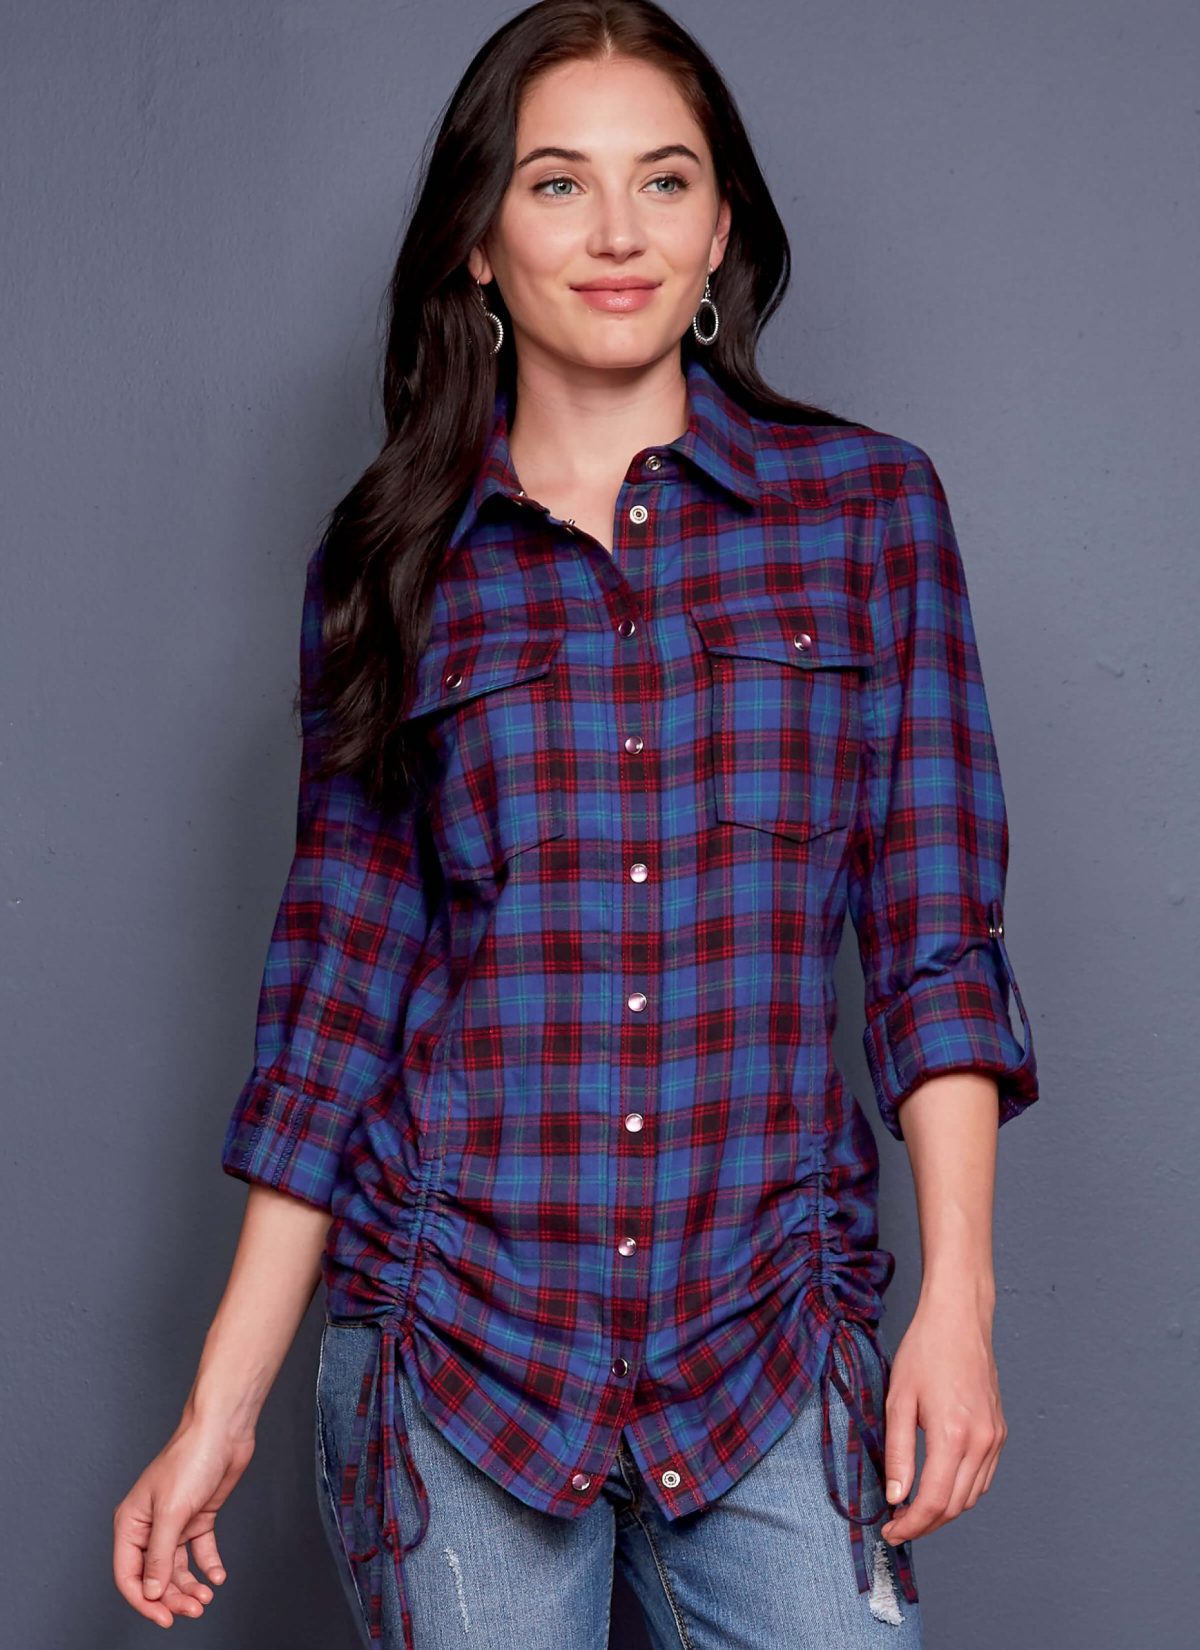 McCall's Sewing Pattern M8027 Misses' Tops